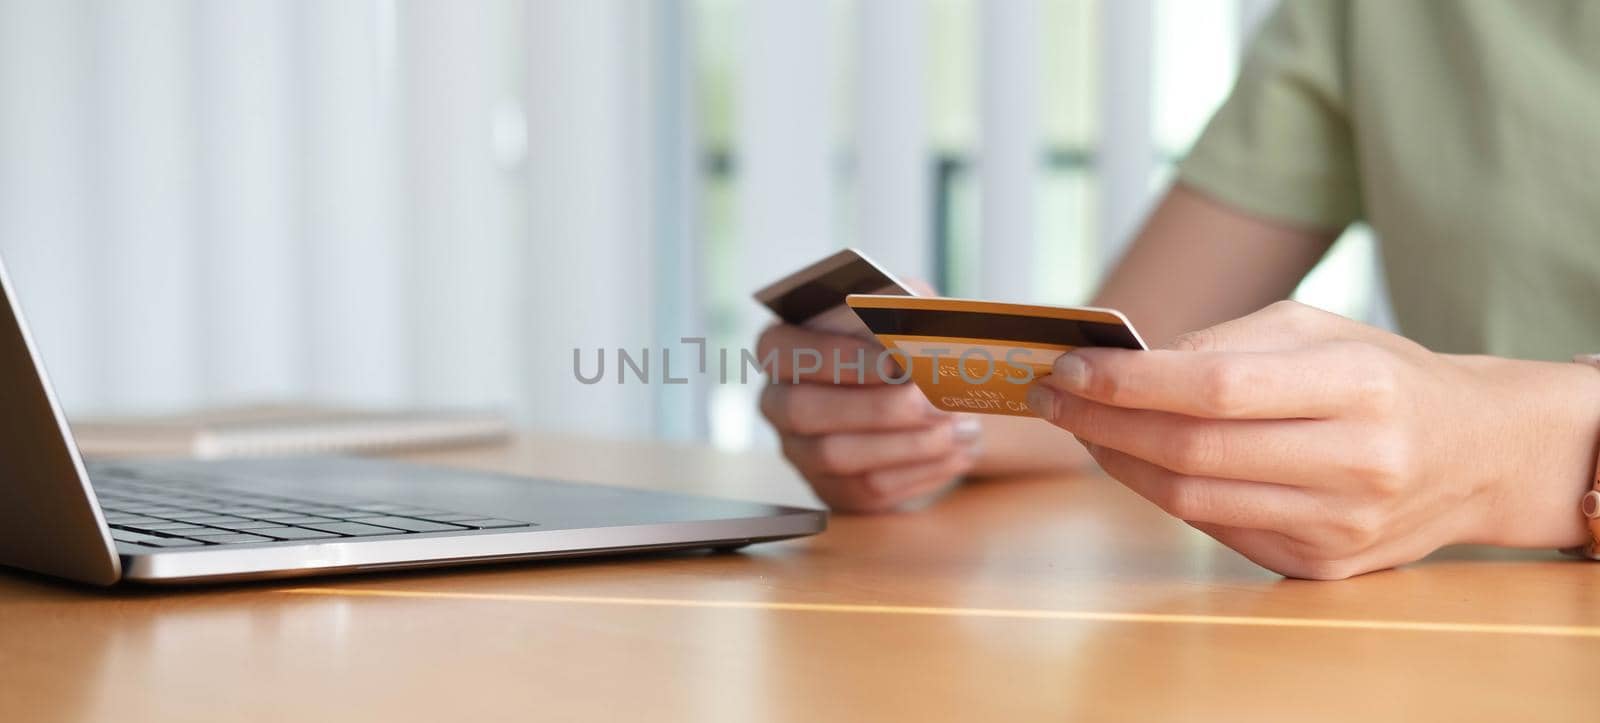 Online shopping. Young woman holding credit card and using laptop at home. African american girl working on computer at cafe. Business, e-commerce, internet banking, finance, freelance concept.